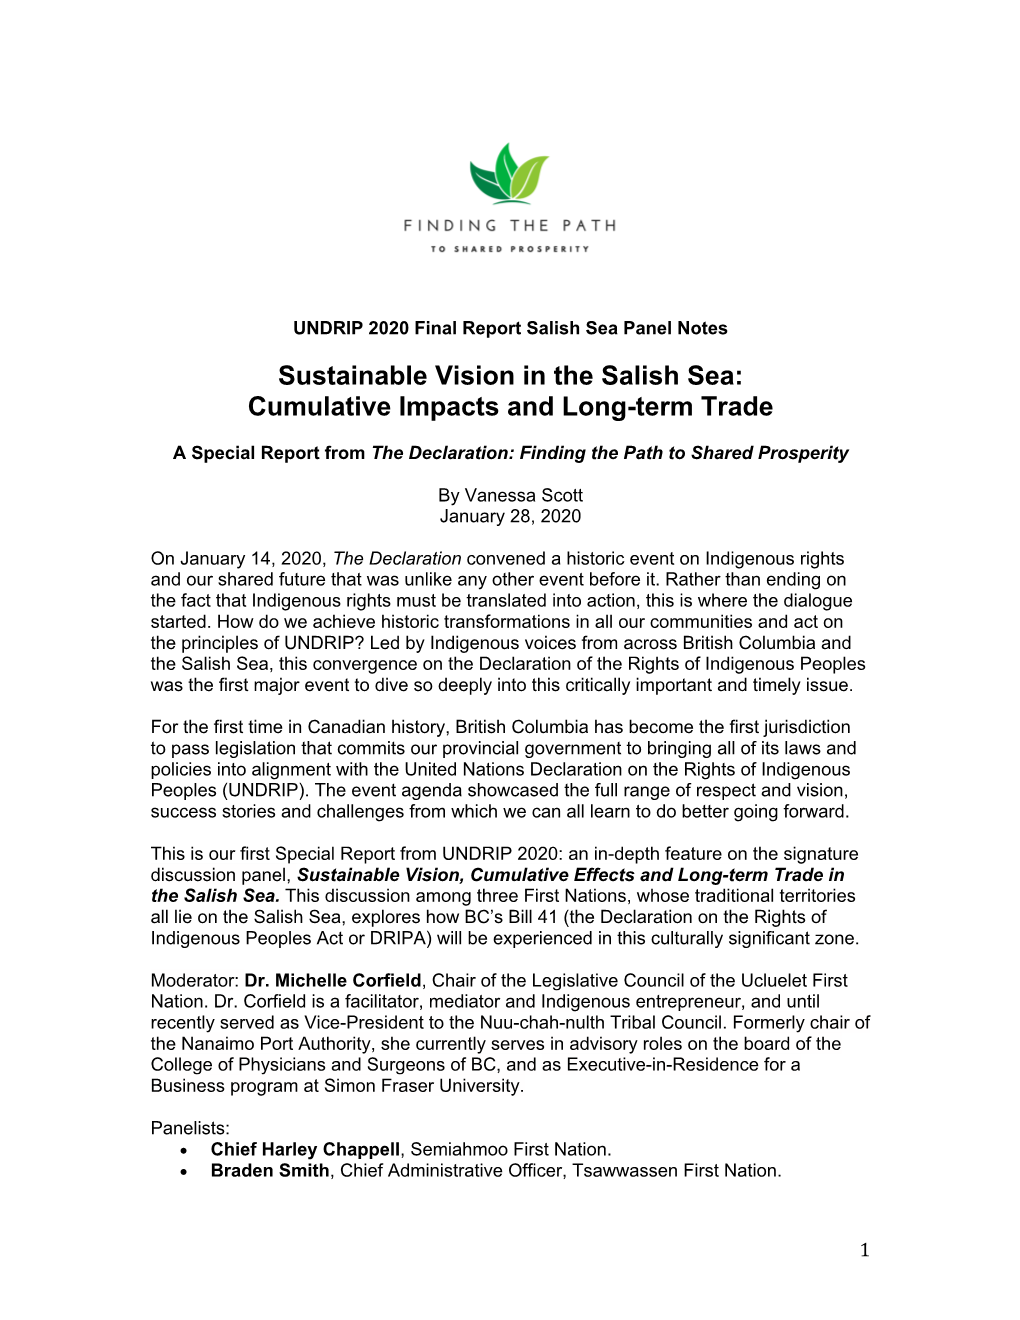 Sustainable Vision in the Salish Sea: Cumulative Impacts and Long-Term Trade